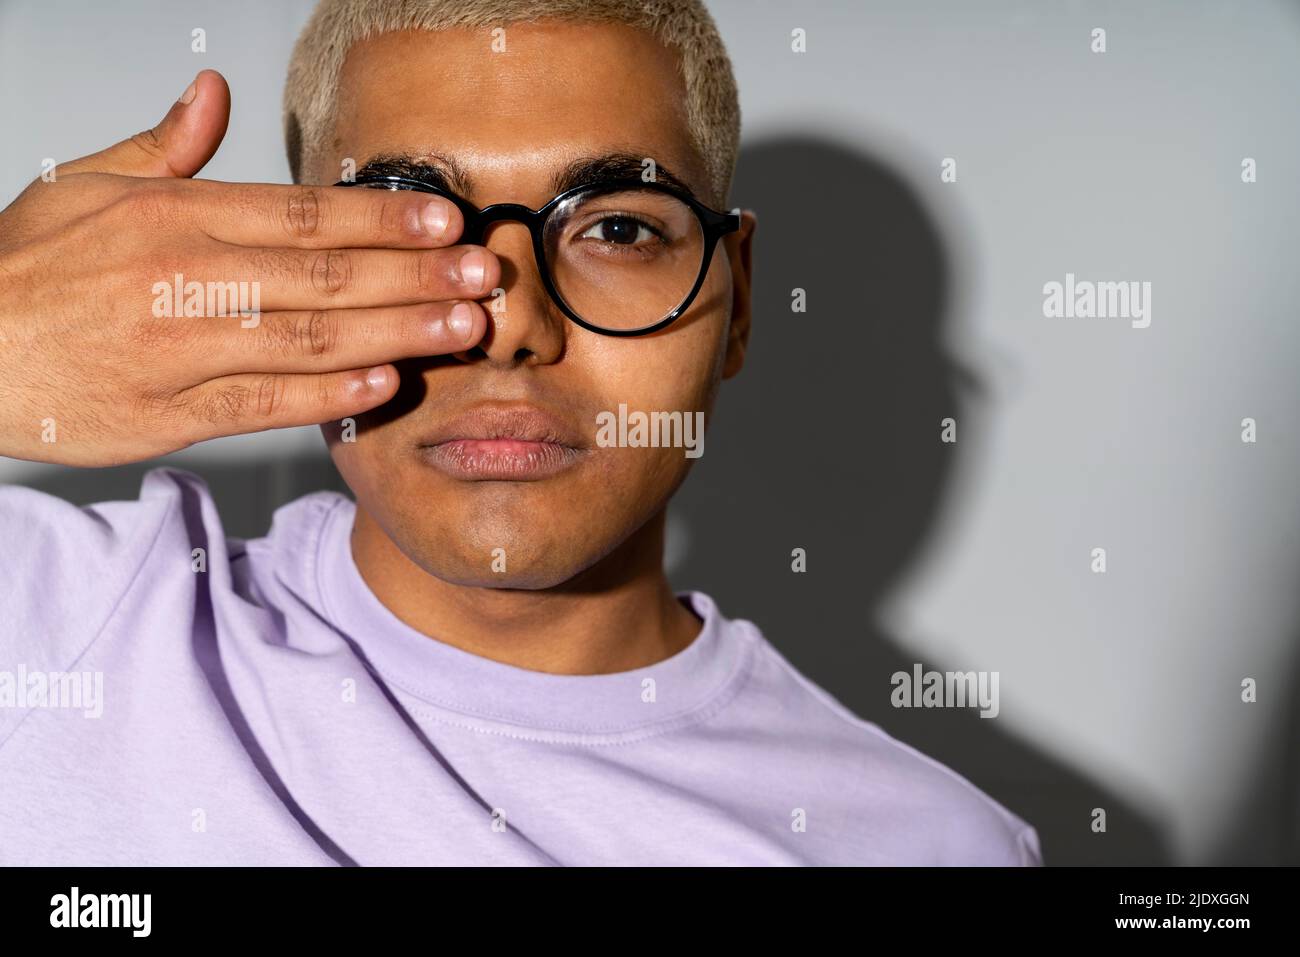 Young man covering eye with hand standing in front of wall Stock Photo